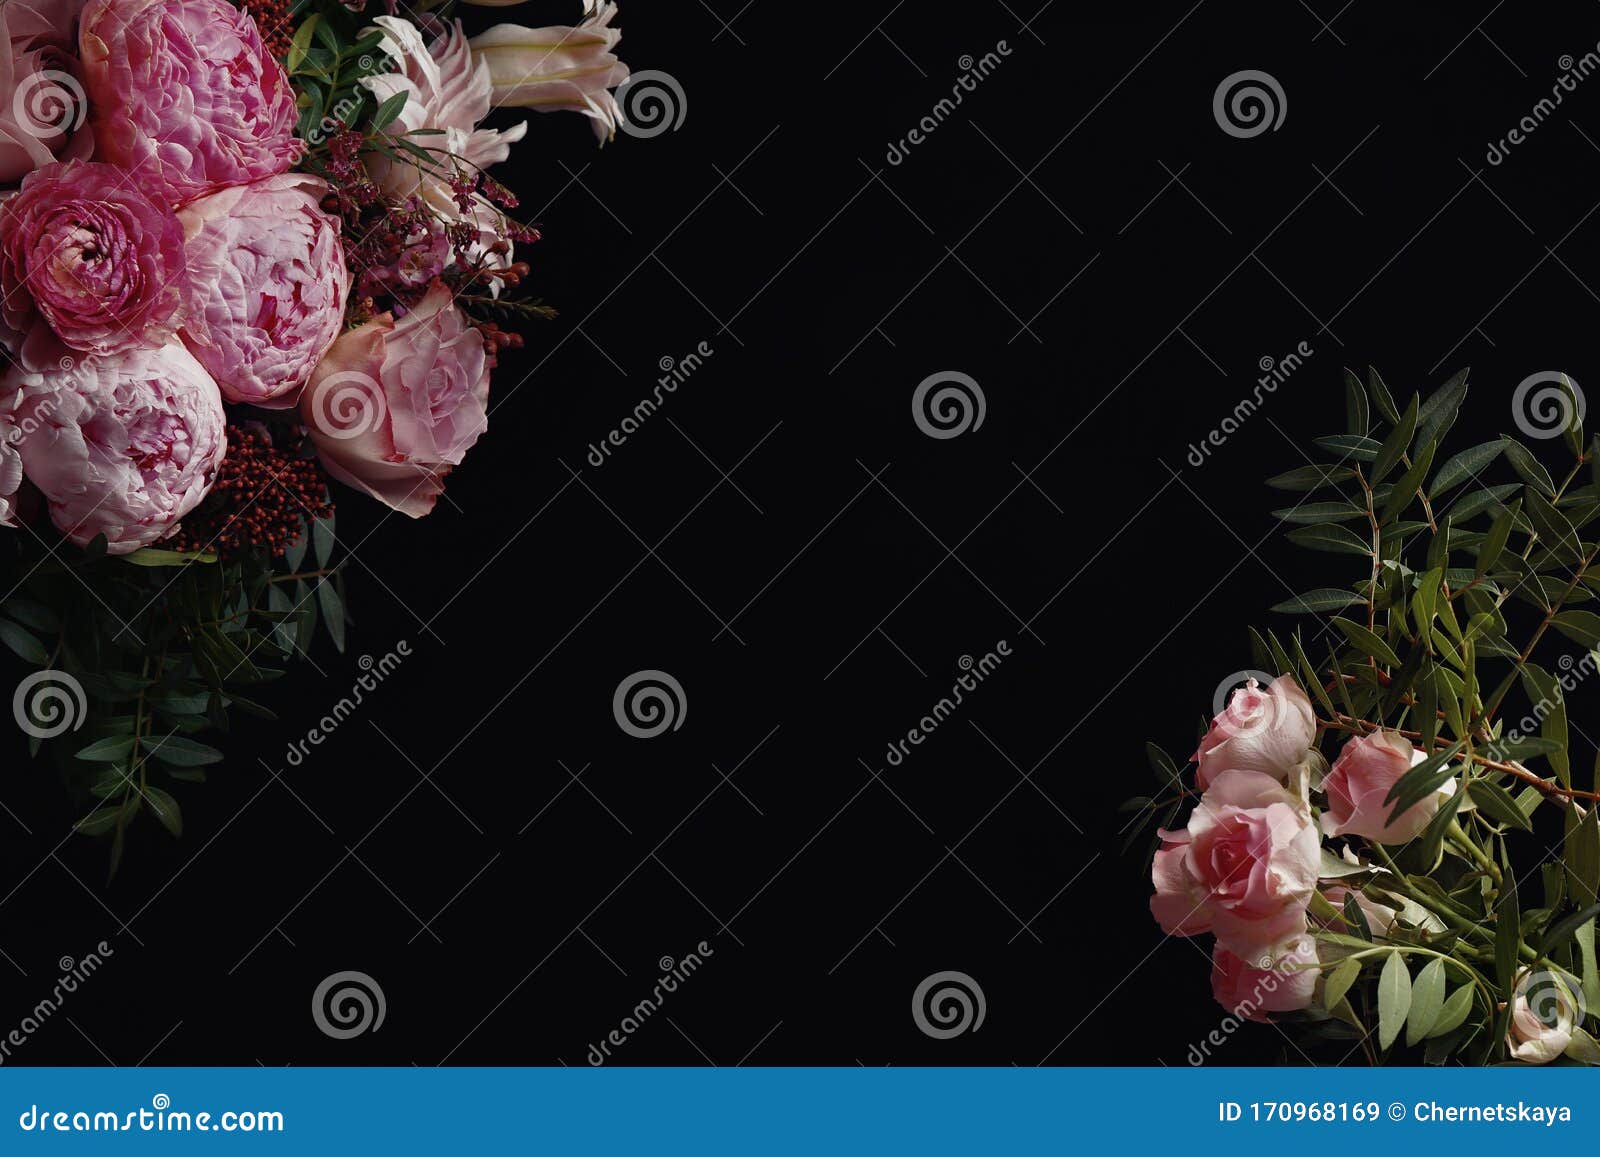 Beautiful Bouquet of Flowers on Black Background, Space for Text. Floral  Card Design with Dark Vintage Effect Stock Image - Image of background,  decor: 170968169